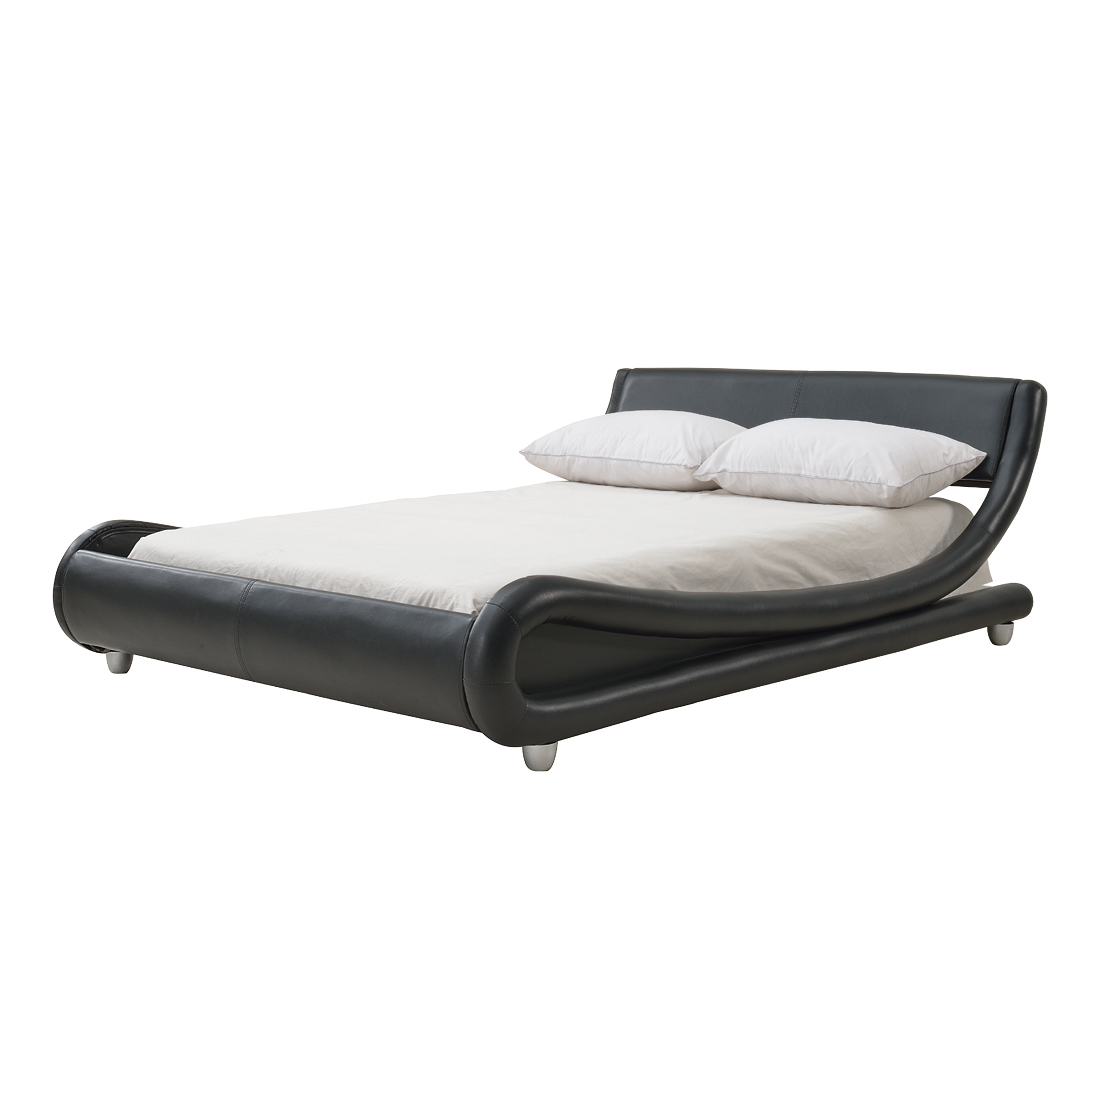 Galaxy 4.6 Double Bed Black